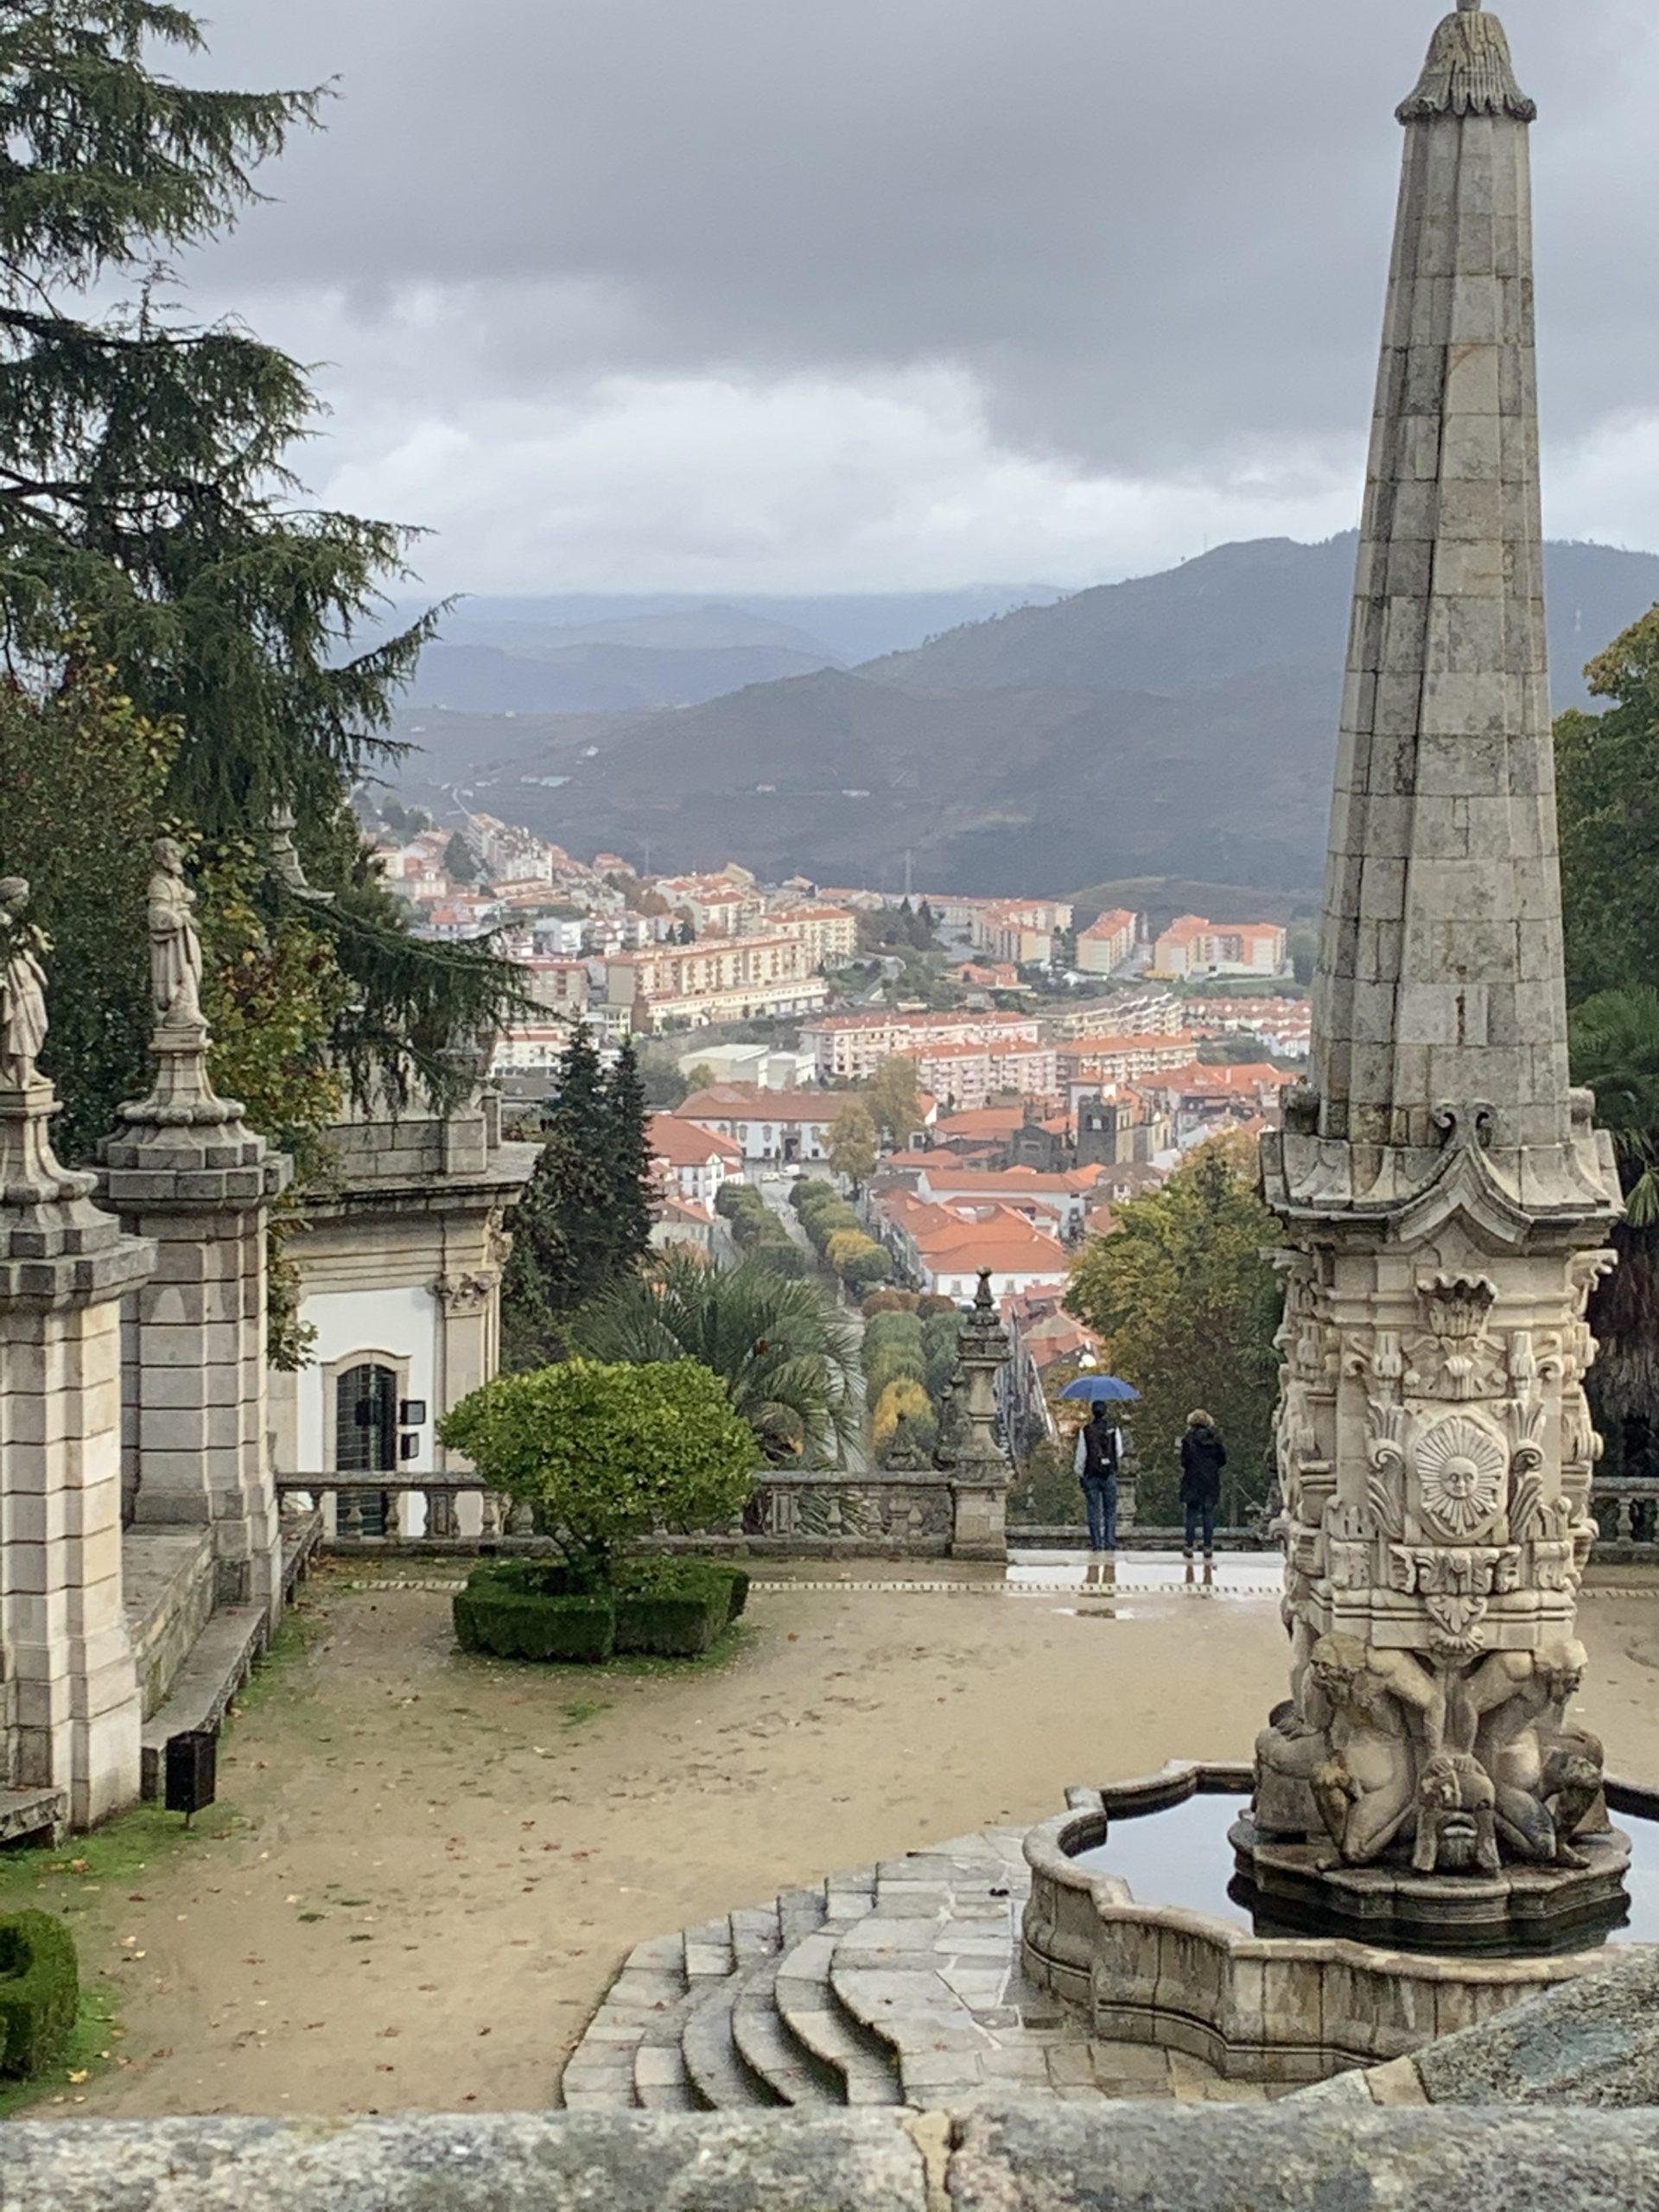 View of Lamego, Portugal from Sanctuary of Our Lady Of Remedies